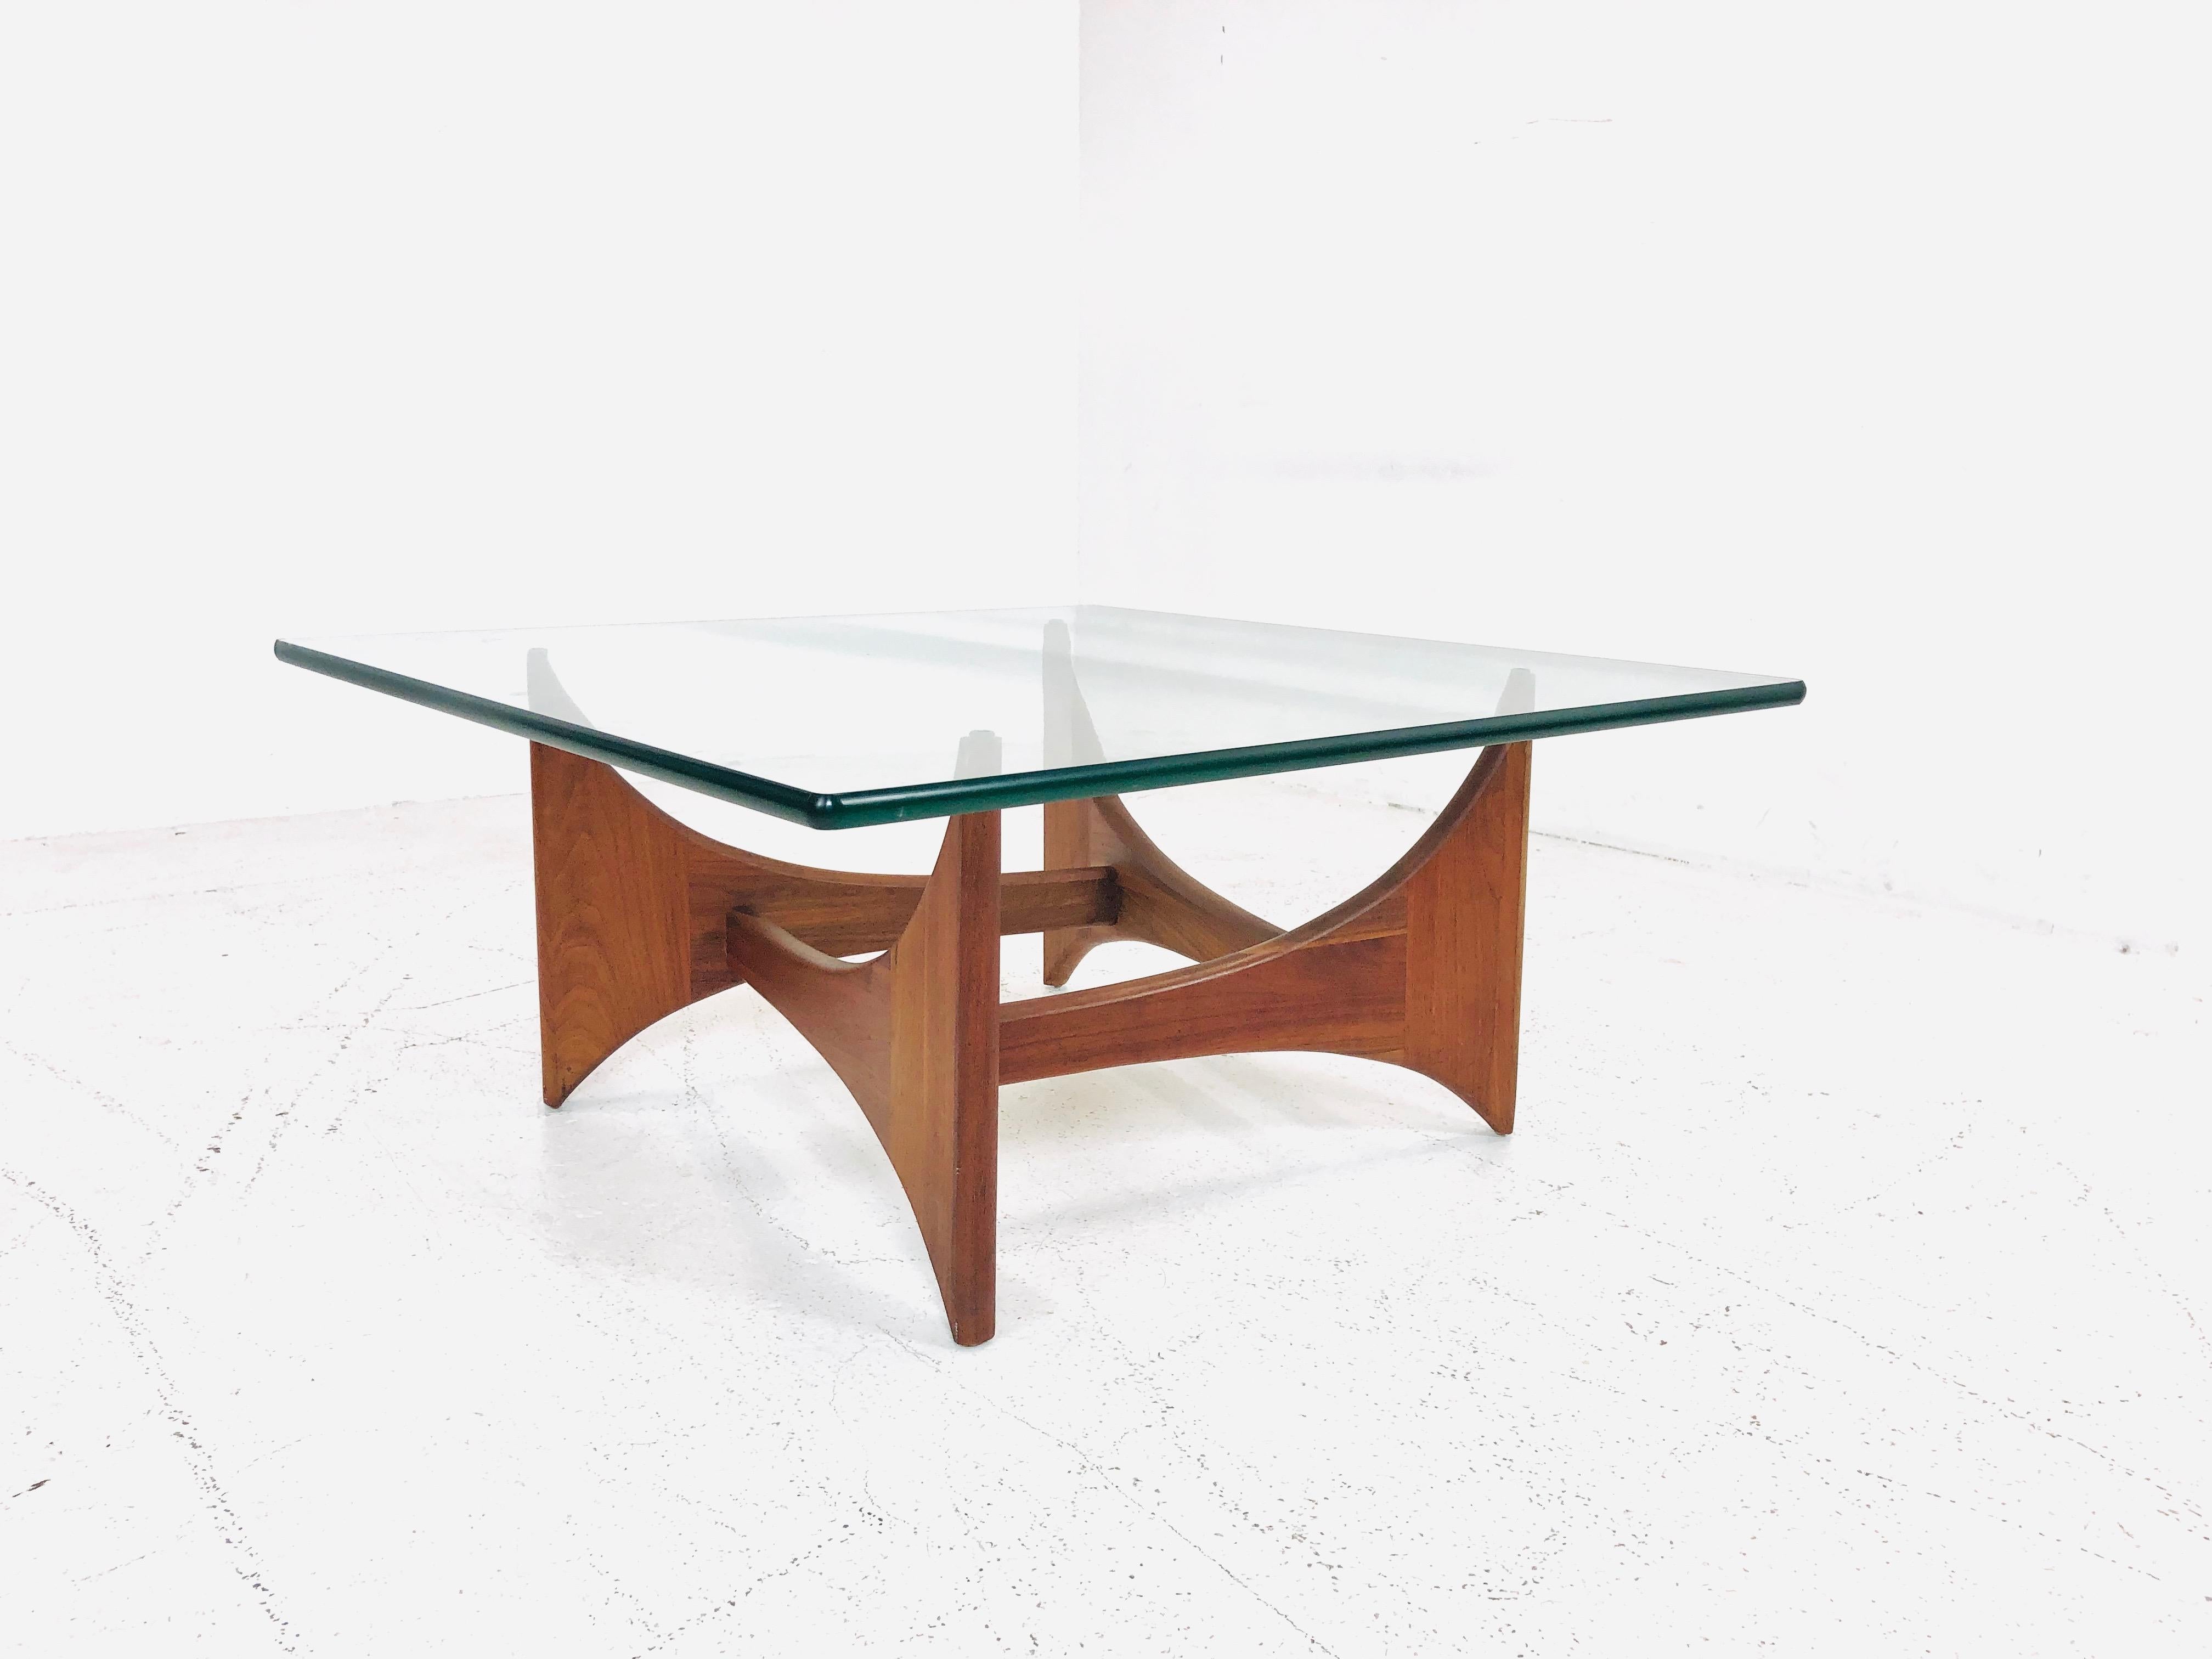 Walnut Adrian Pearsall sculptural coffee table. Table is in good vintage condition with minor wear. The includes 1